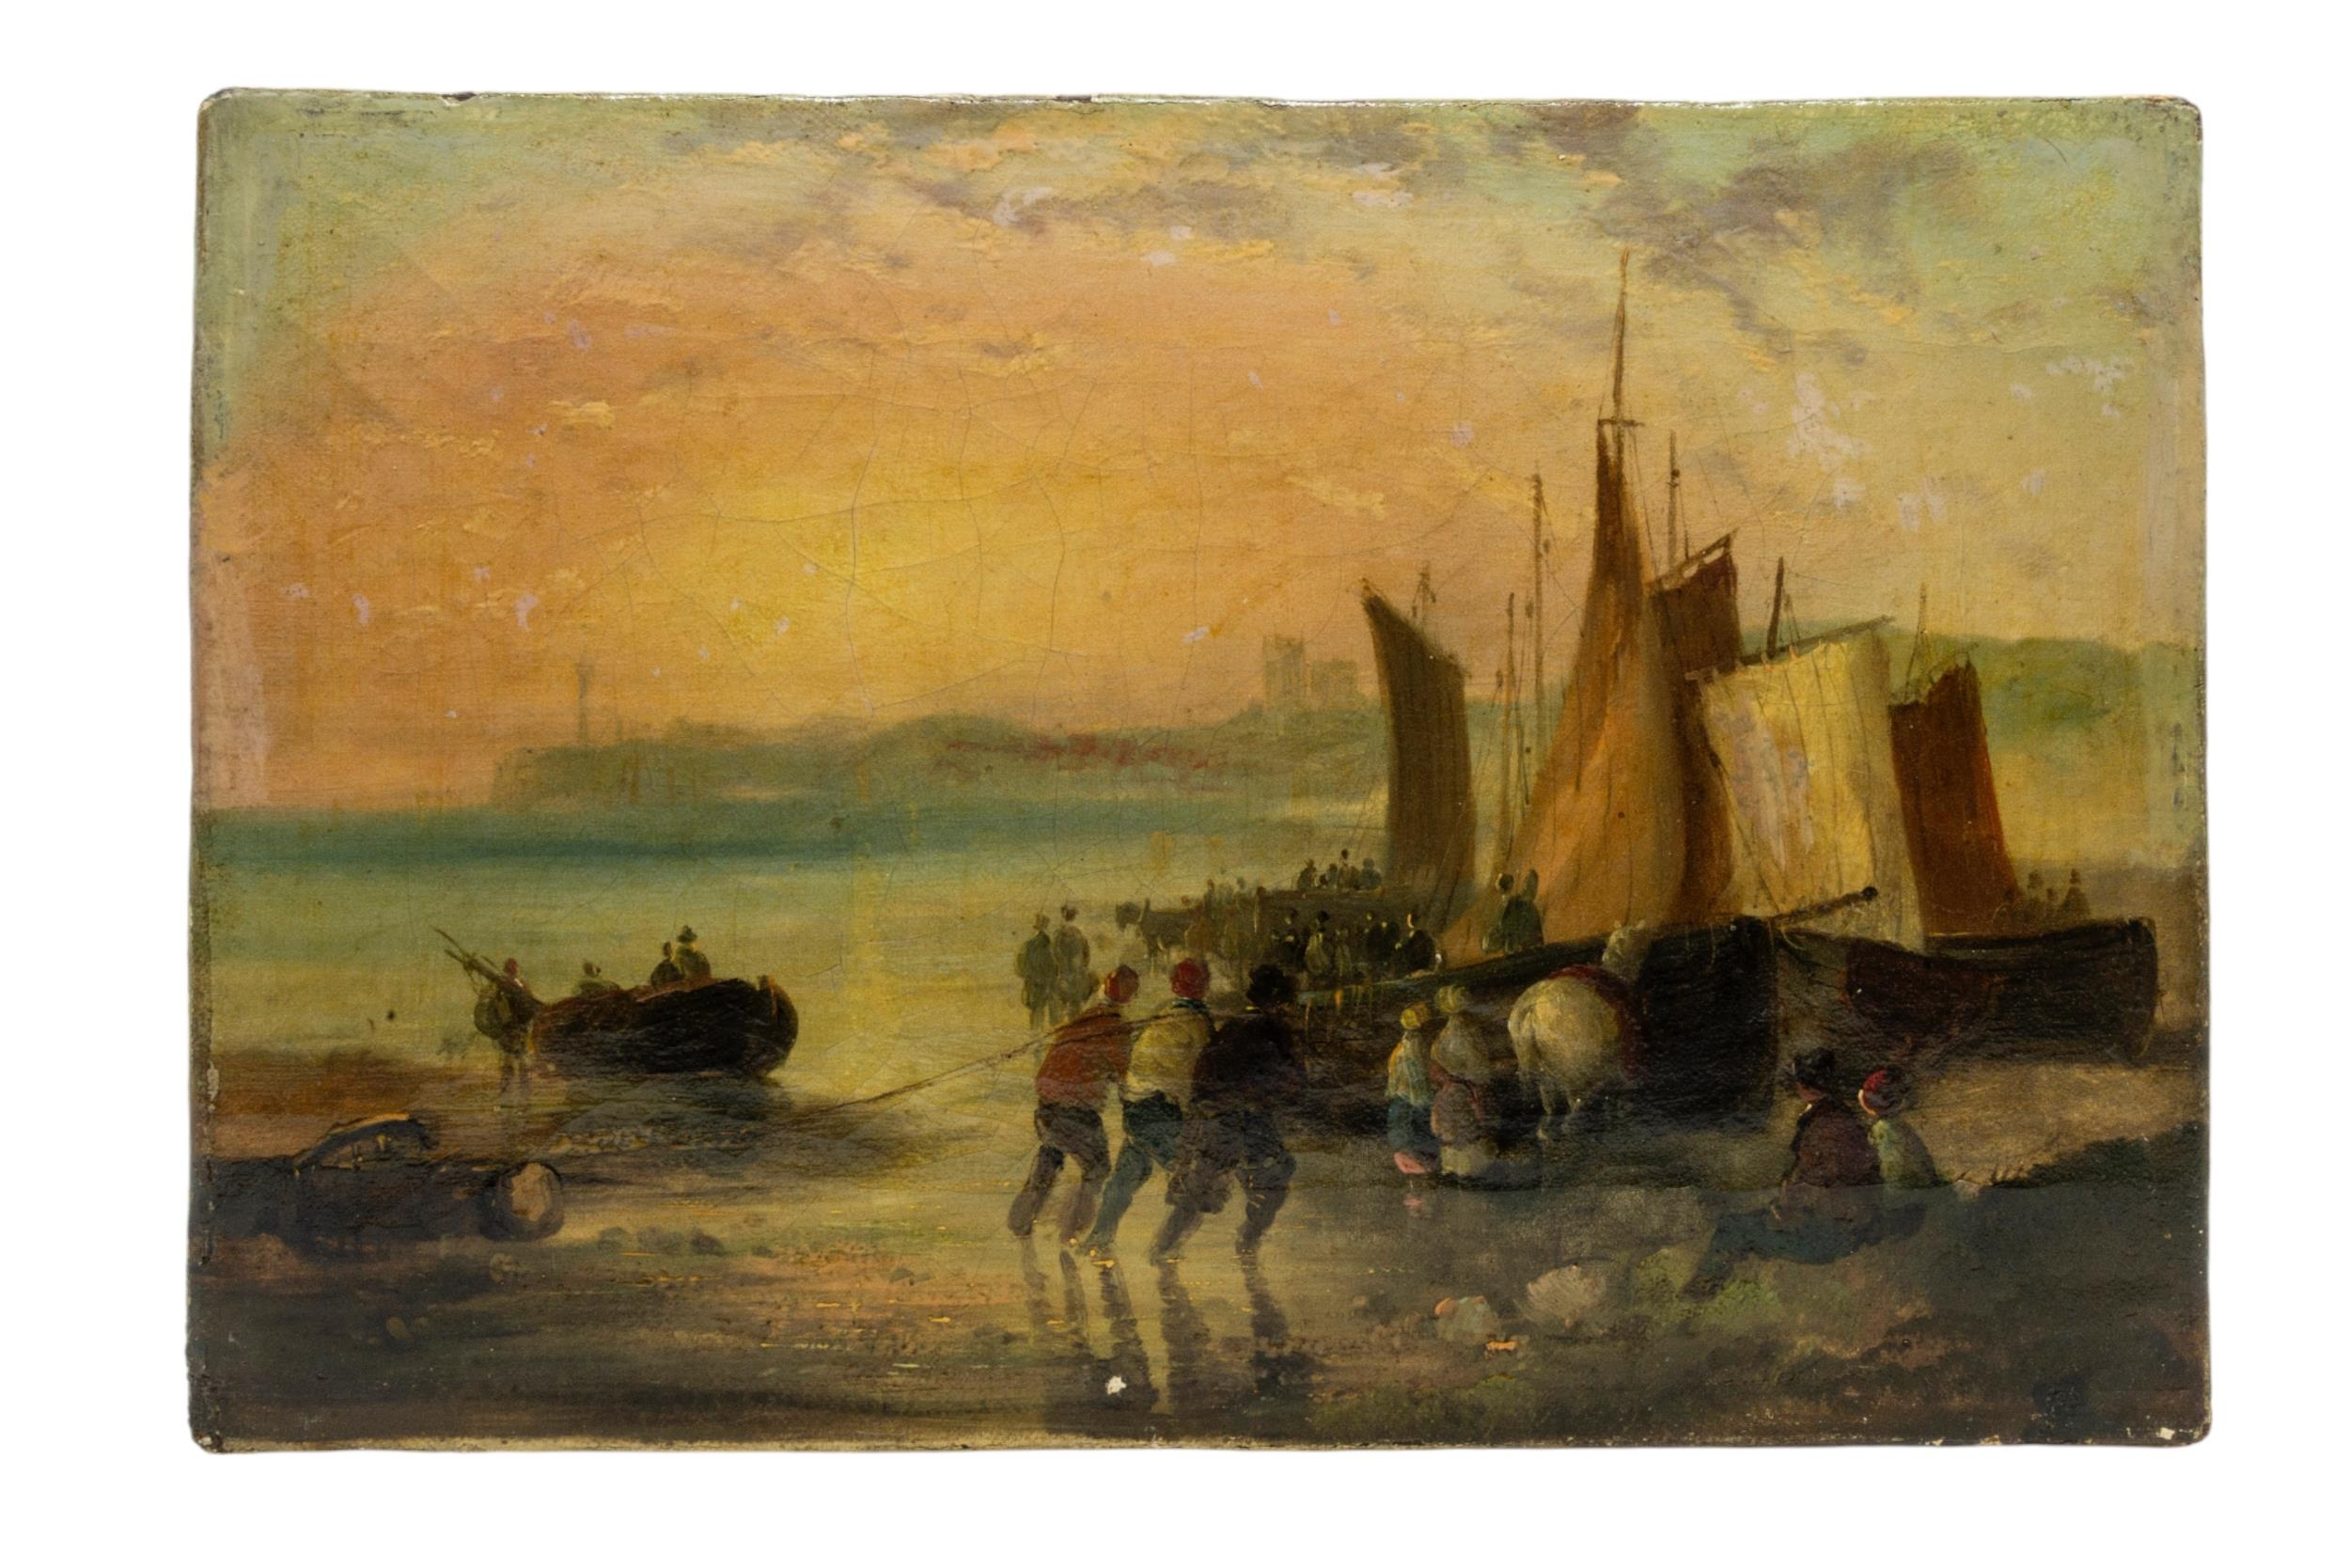 AN OIL PAINTING ON CANVAS, PROBABLY EARLY 19TH CENTURY, depicting fisherman bringing in the catch at